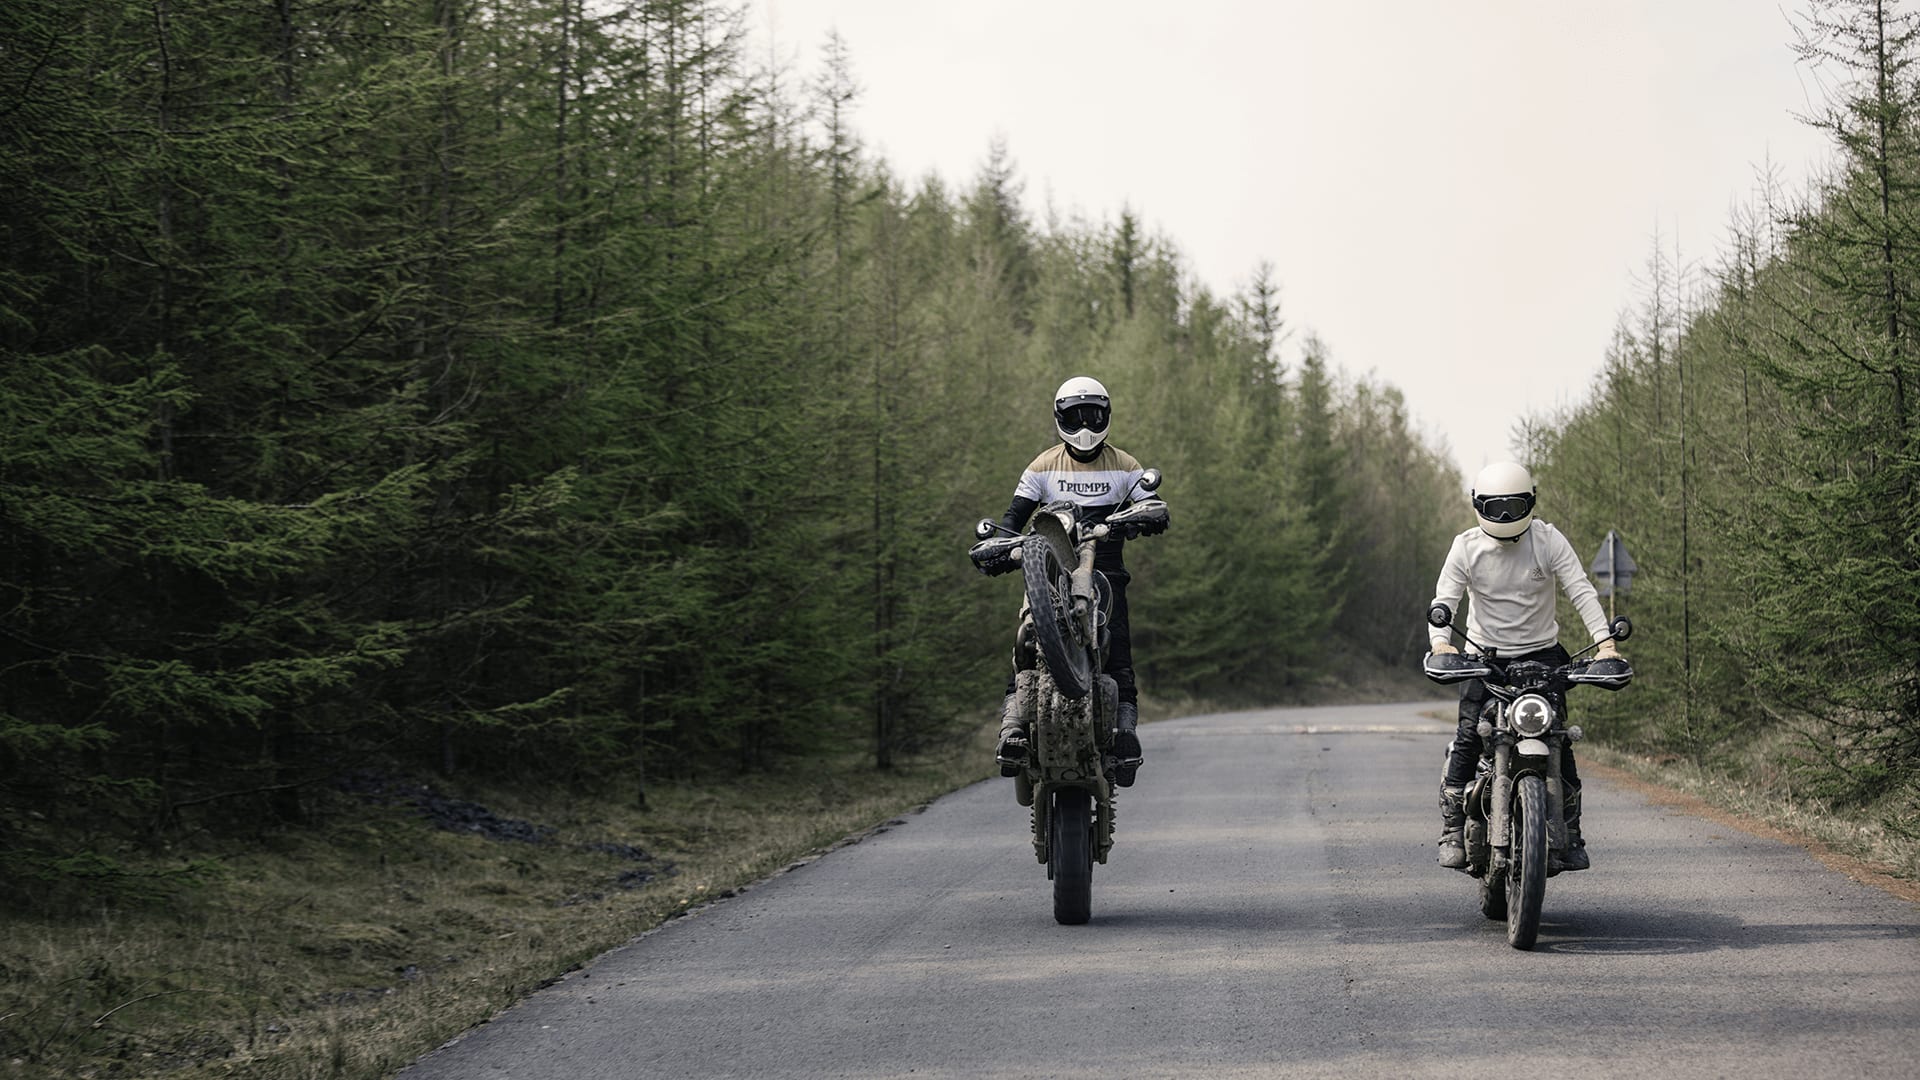 Triumph's collaboration with Bike Shed featuring two Scrambler 1200s with one doing a wheelie